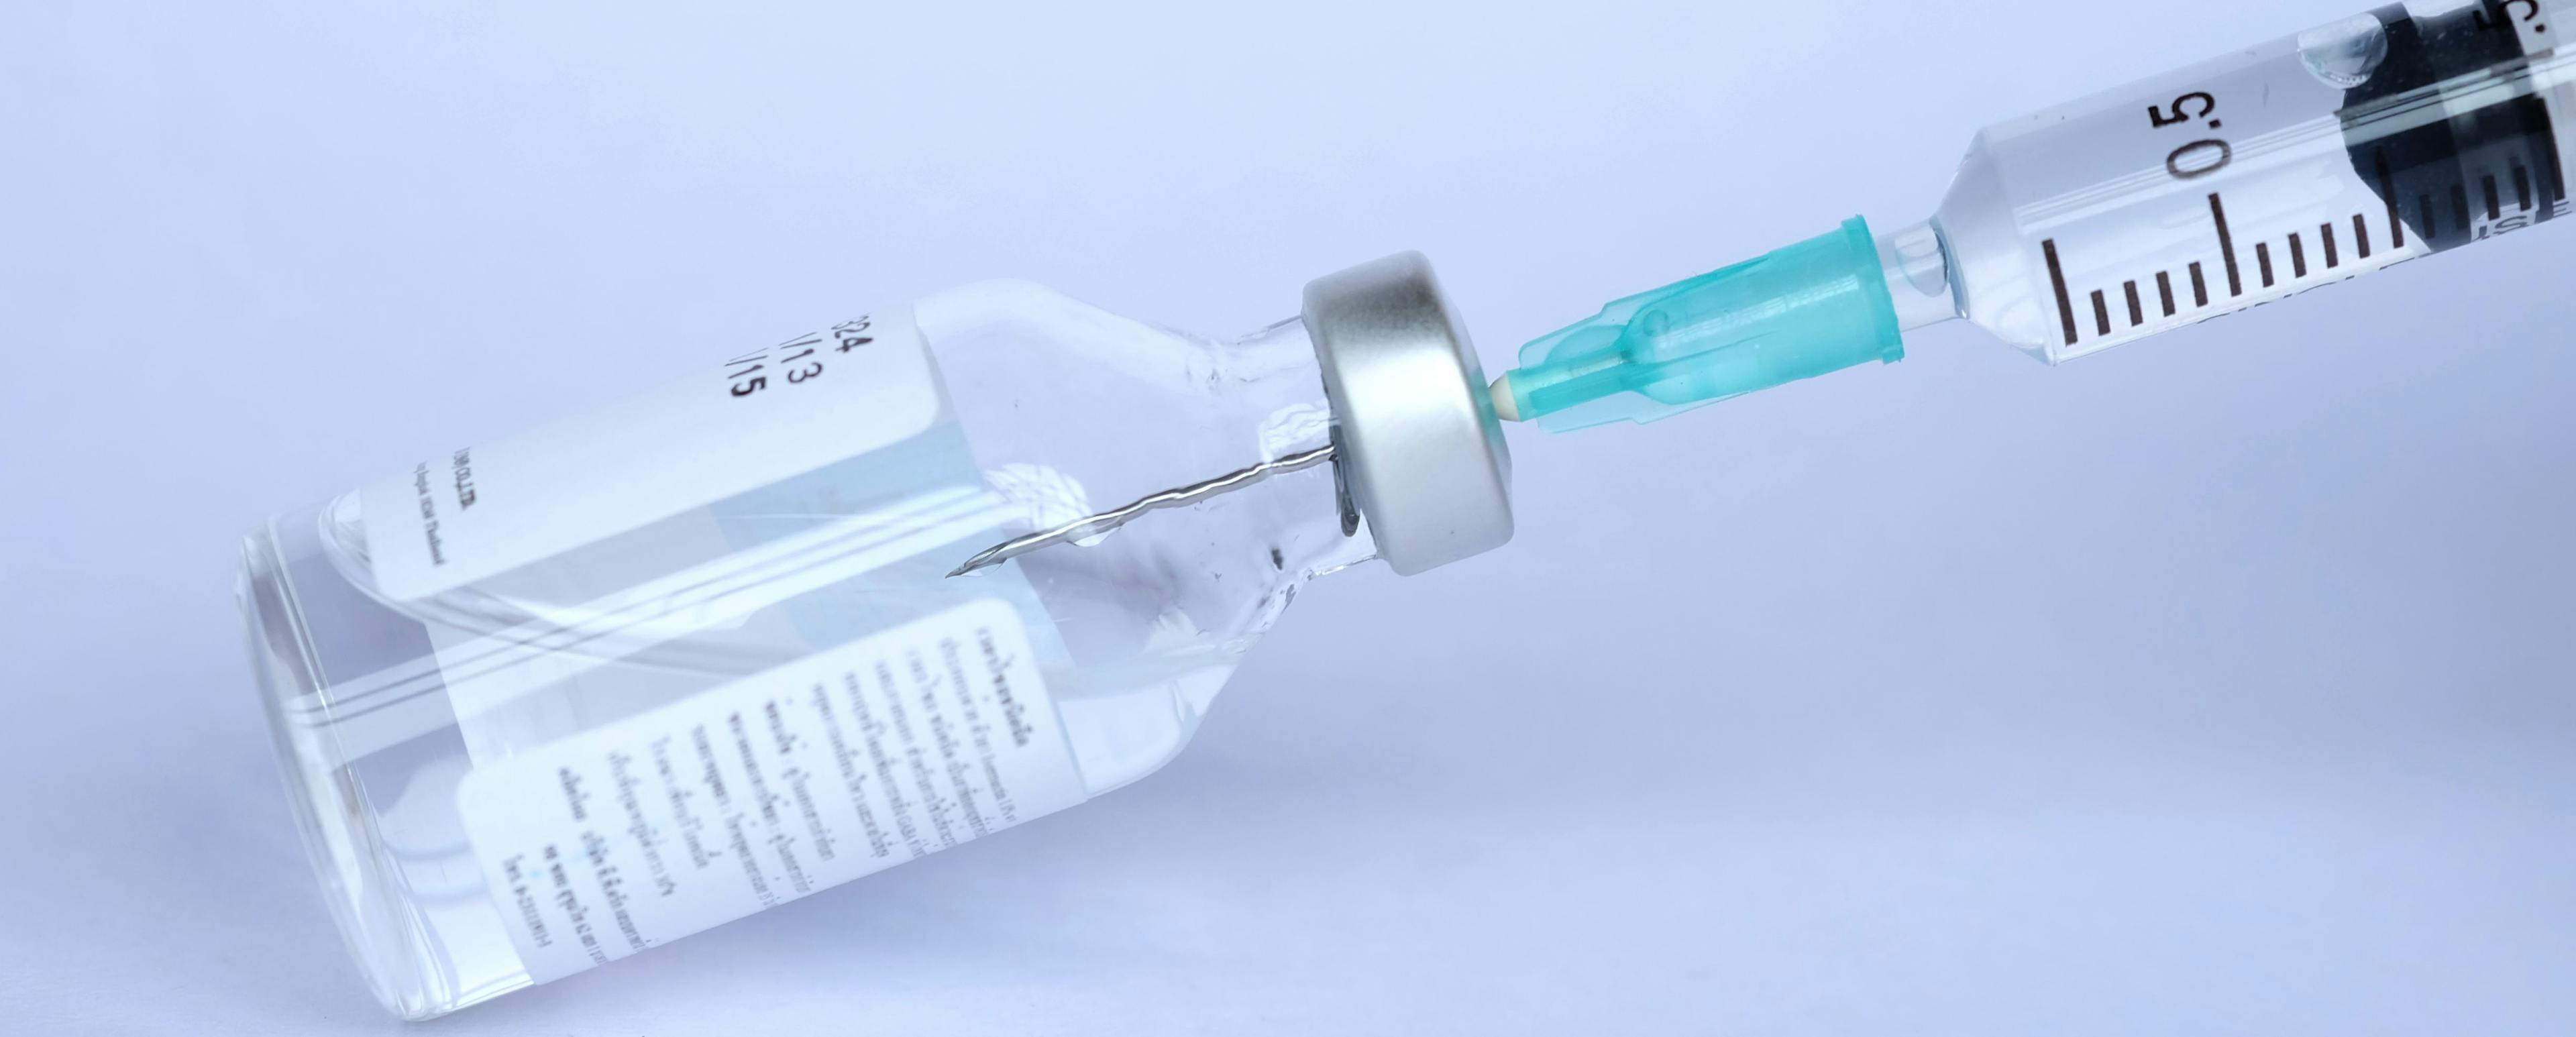 Sodium Chloride Injection Recalled Due to Particulate Matter Complaints